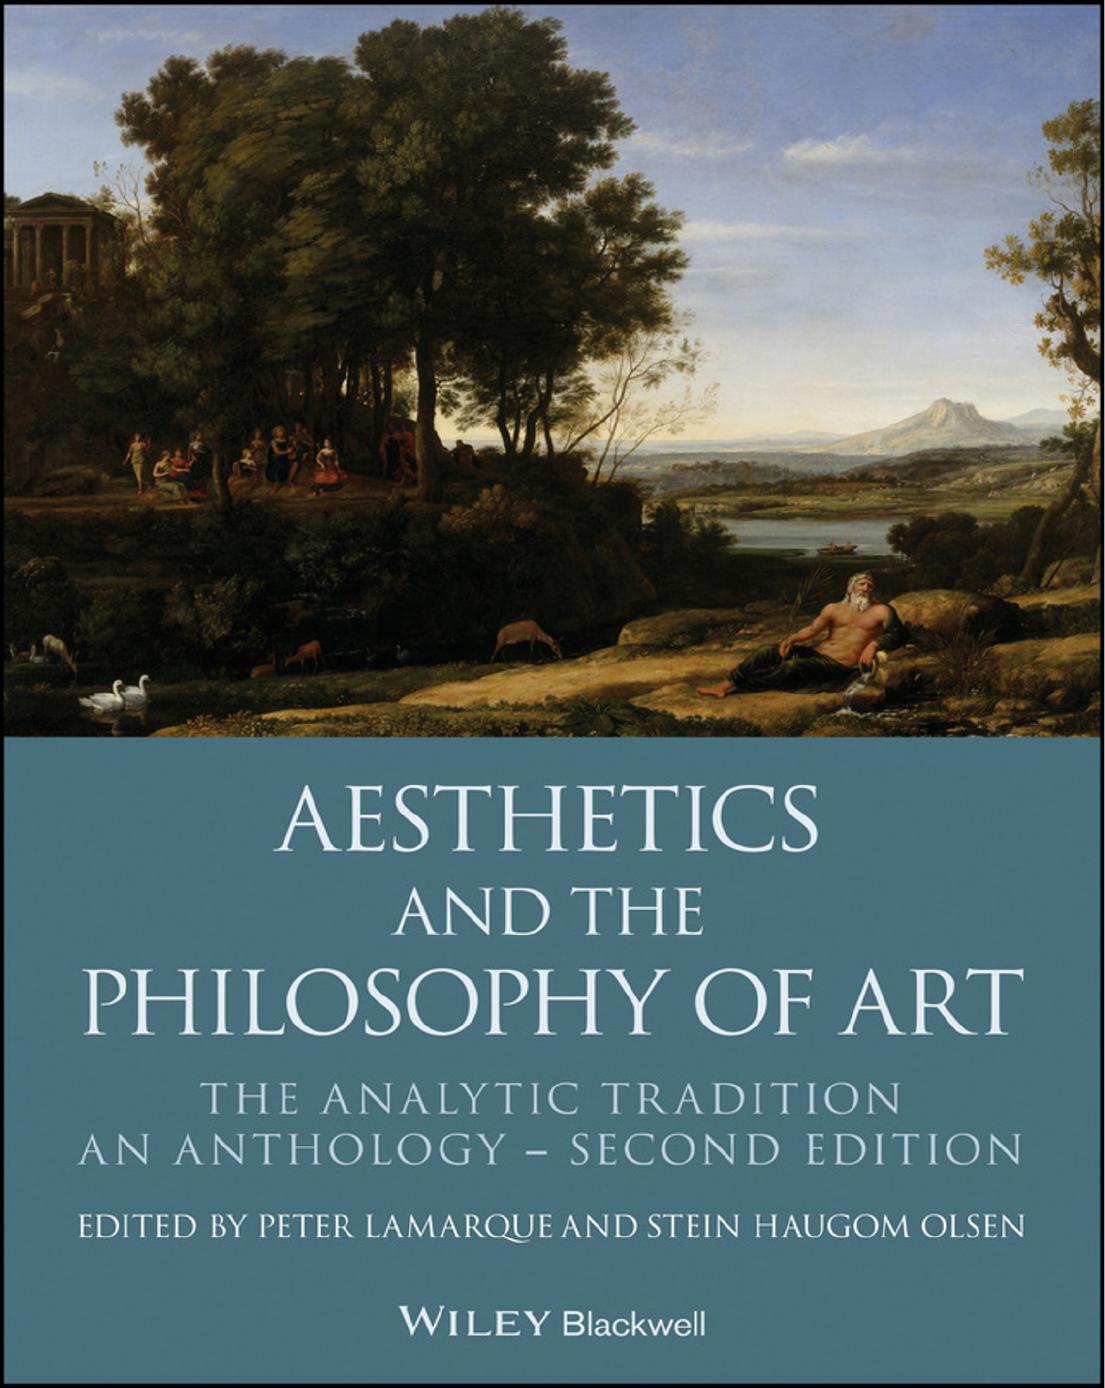 Aesthetics and the Philosophy of Art: The Analytic Tradition, an Anthology